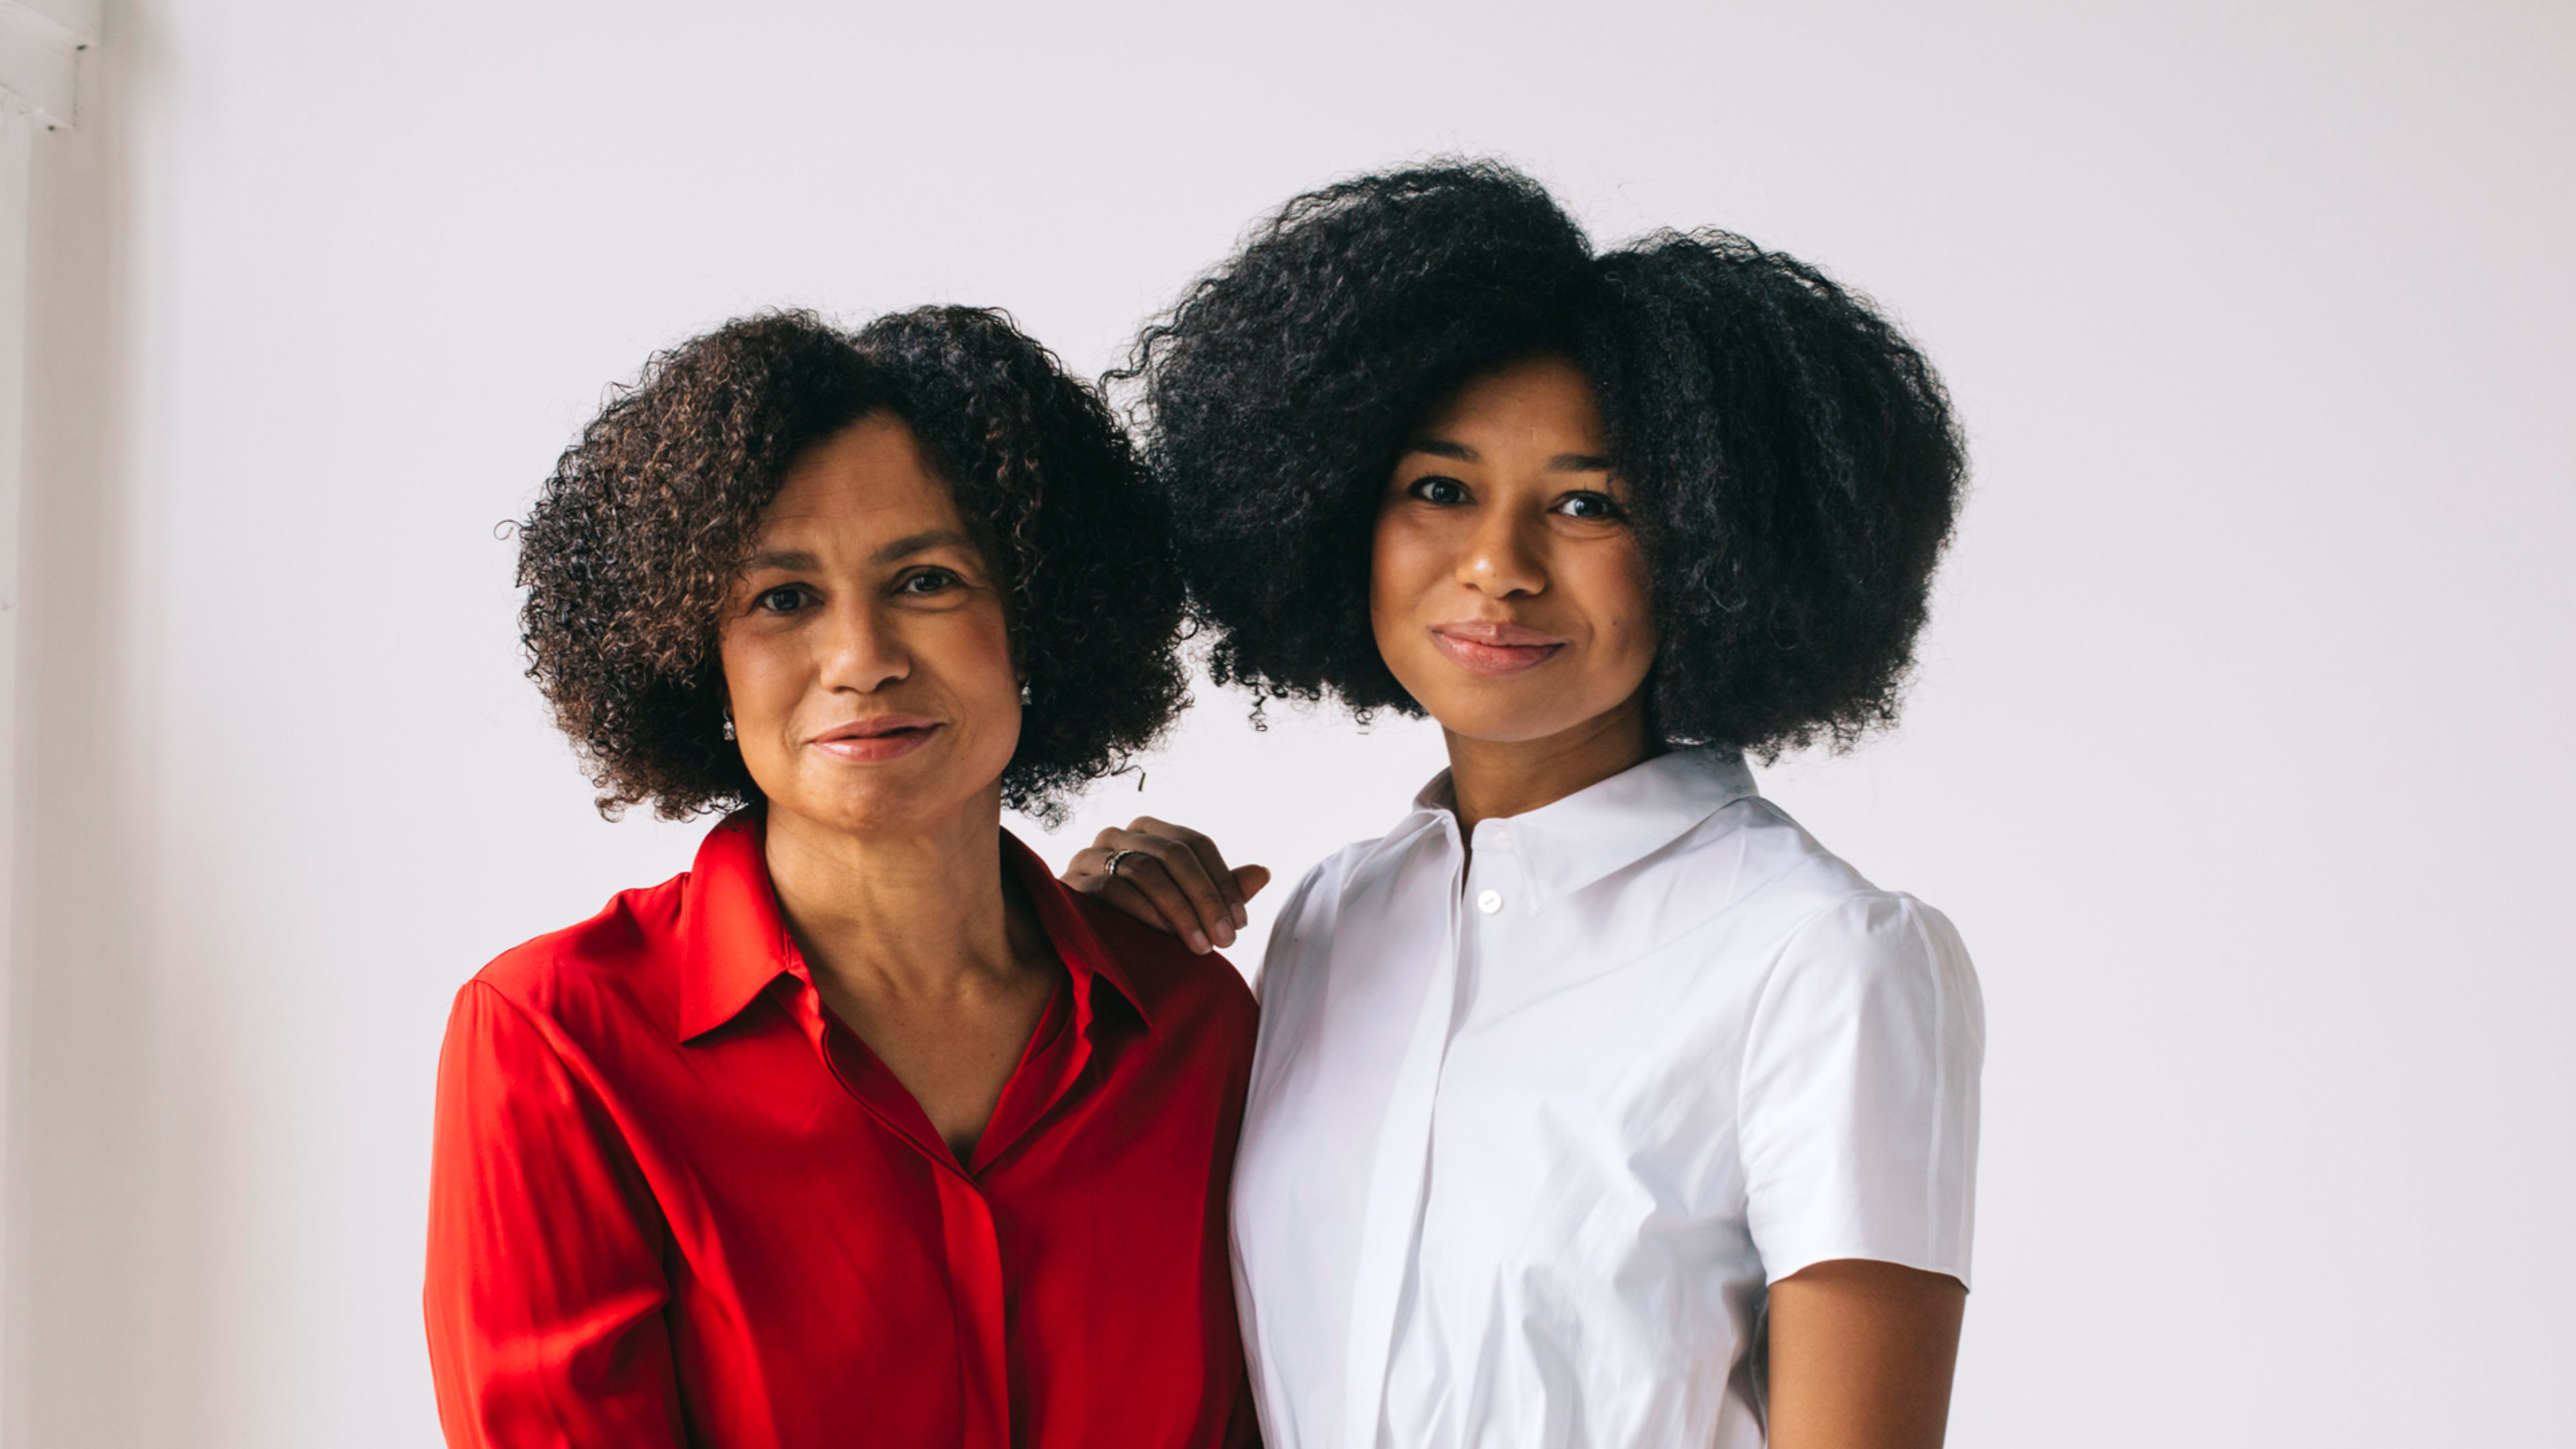 This mother-daughter entrepreneurial team thinks community is key to inclusion